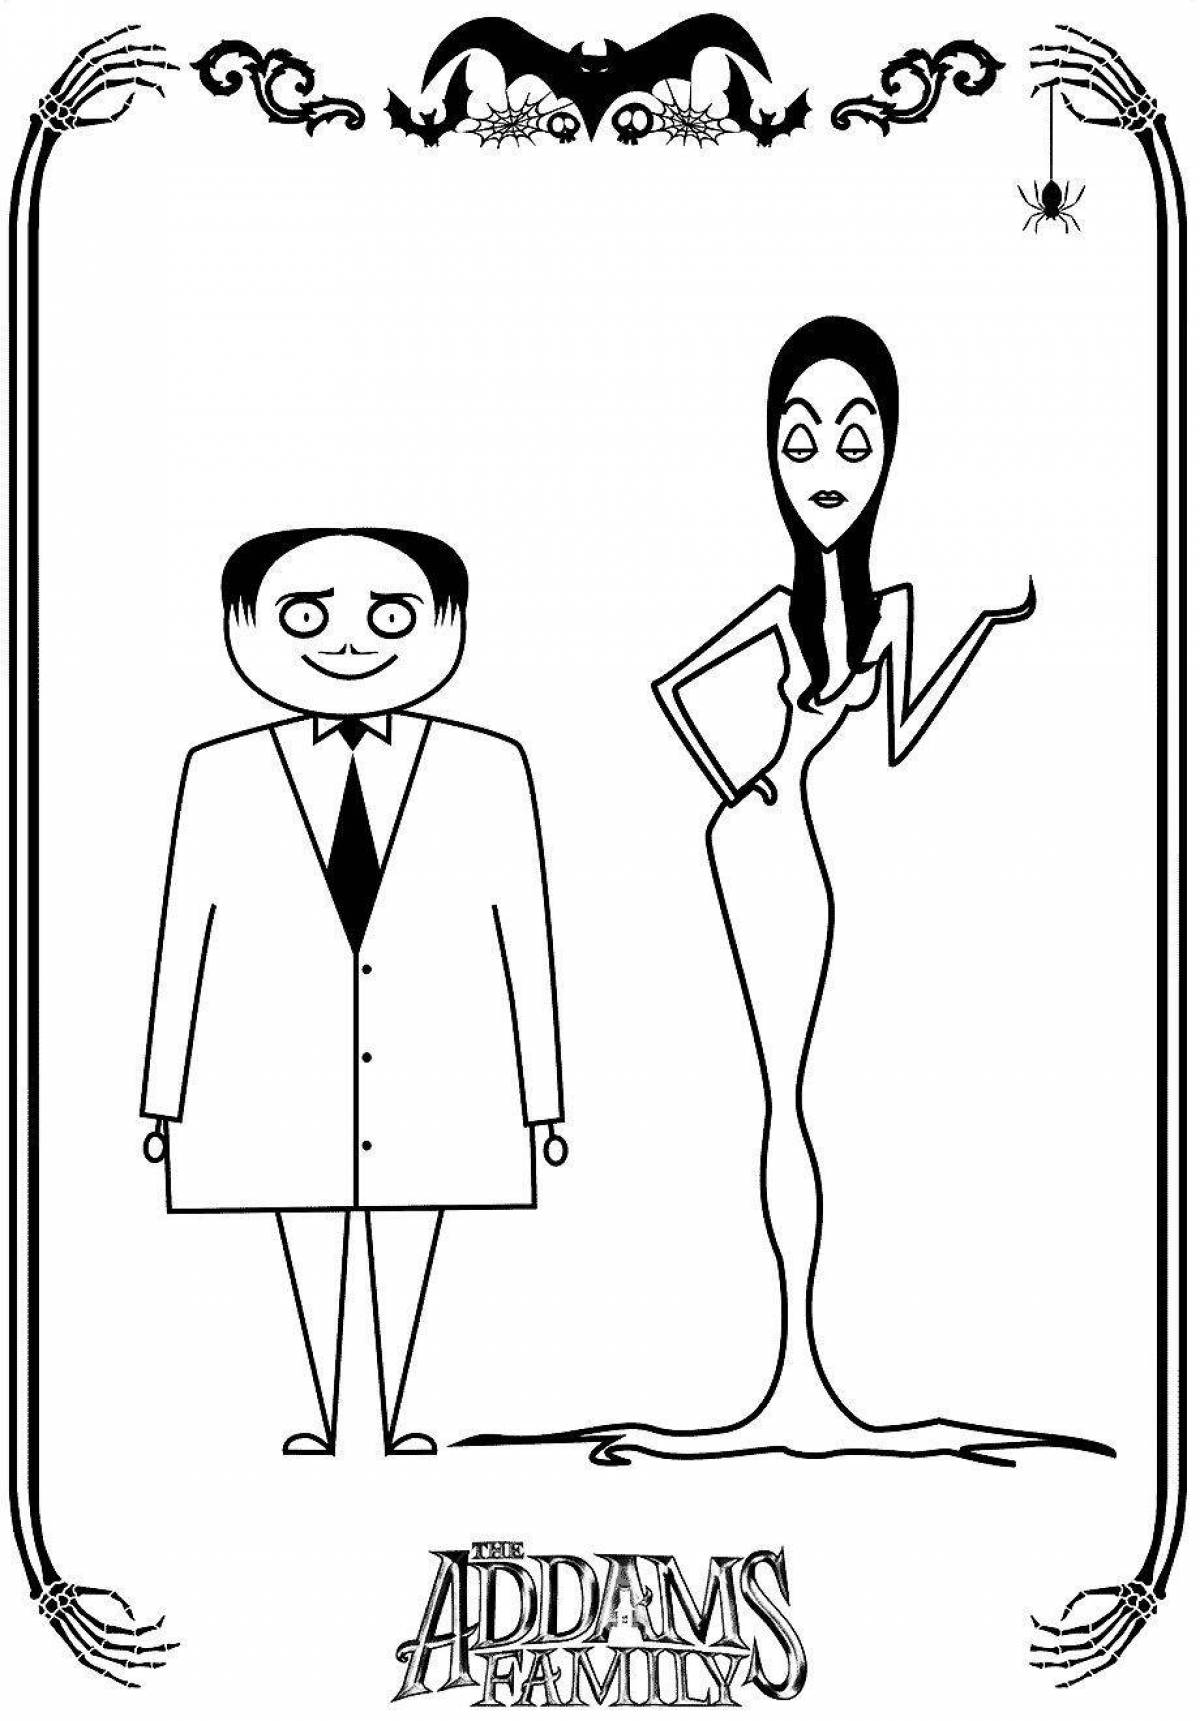 Addams gorgeous environment coloring page